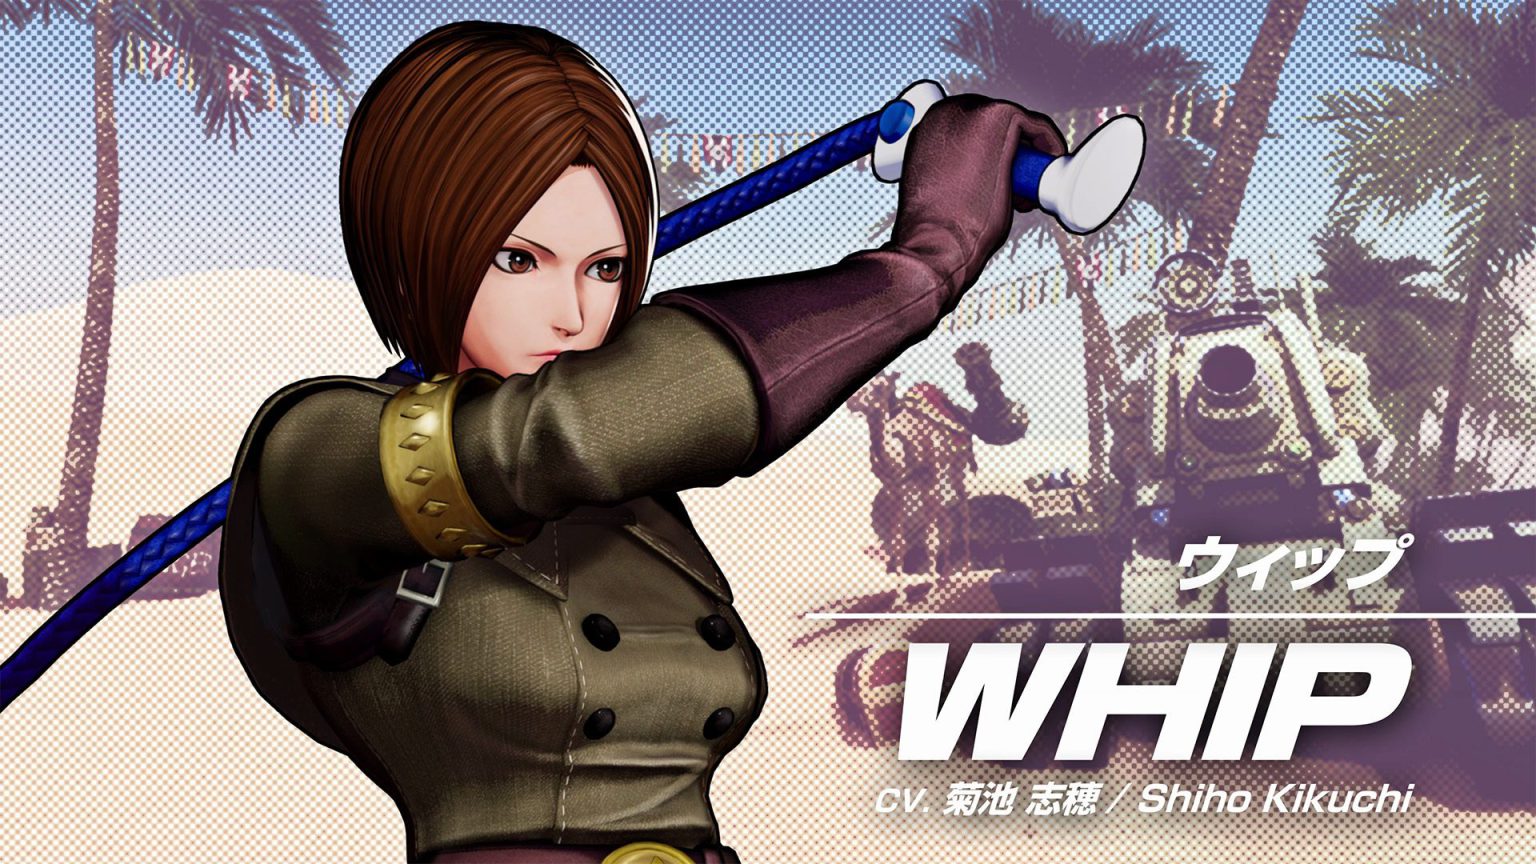 whip - the king of fighters 15 - generacion xbox